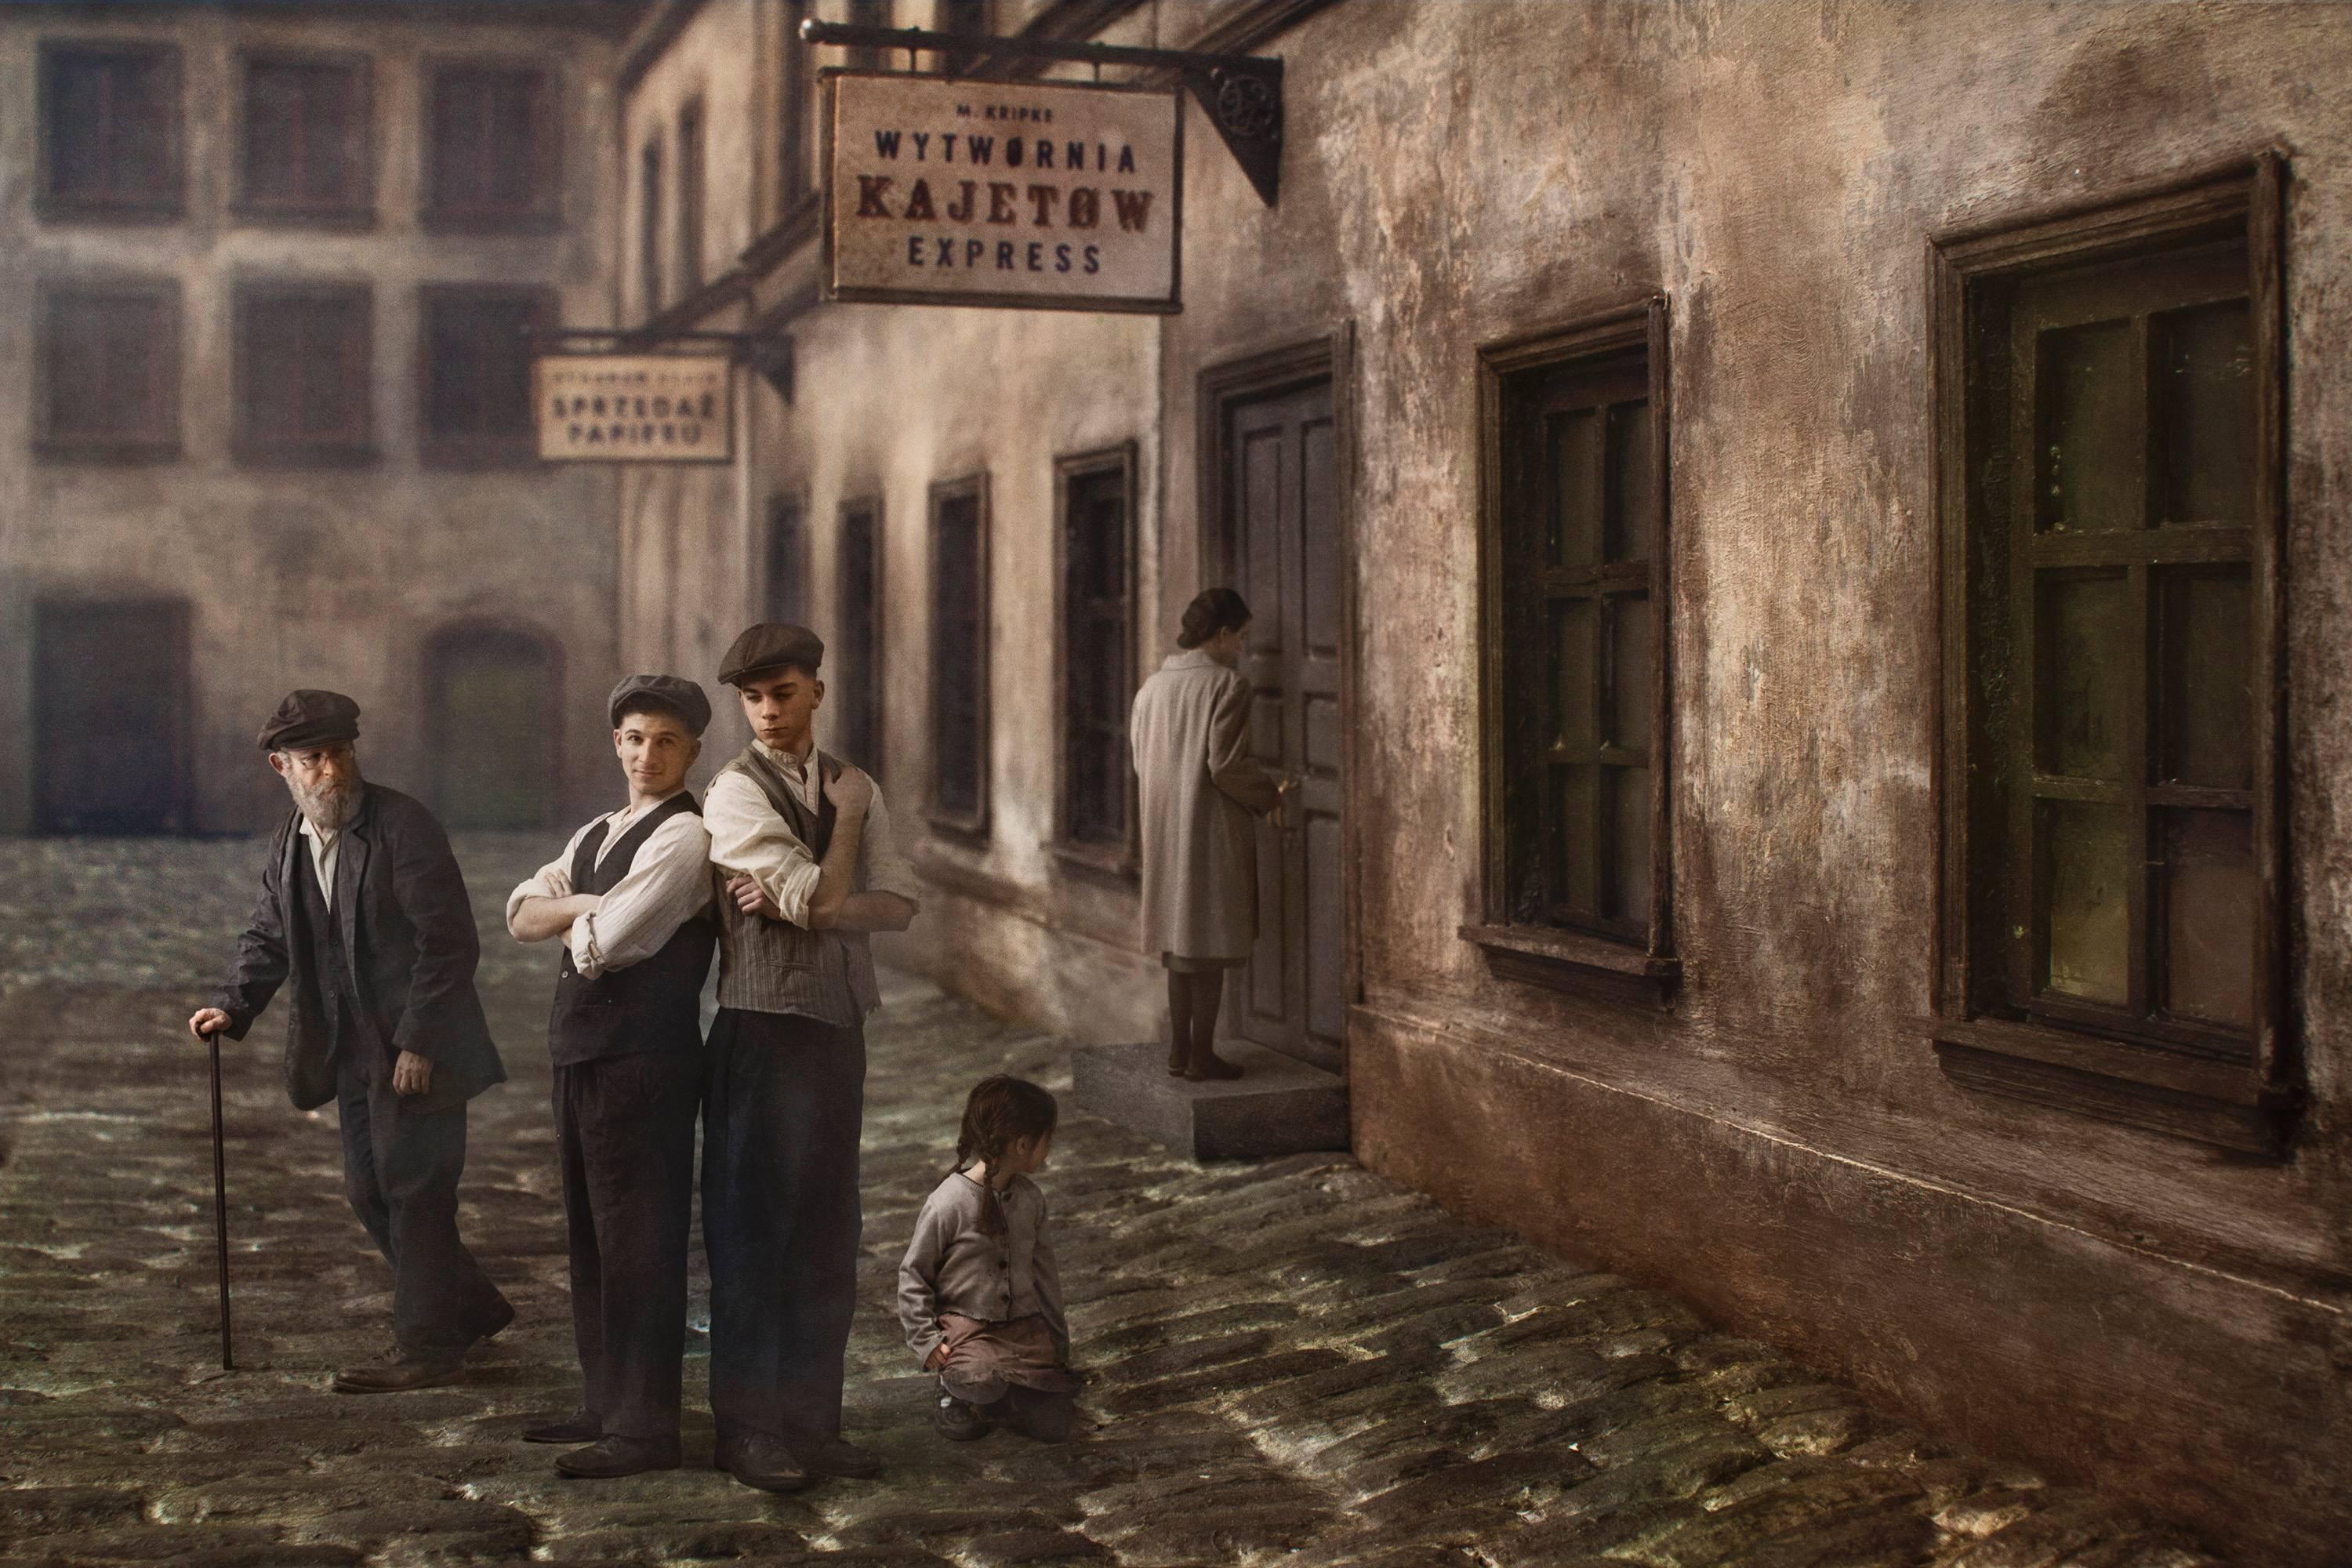 Richard Tuschman Color Photograph - Somewhere in Kazmierz,  limited edition photograph, signed, archival pigment ink